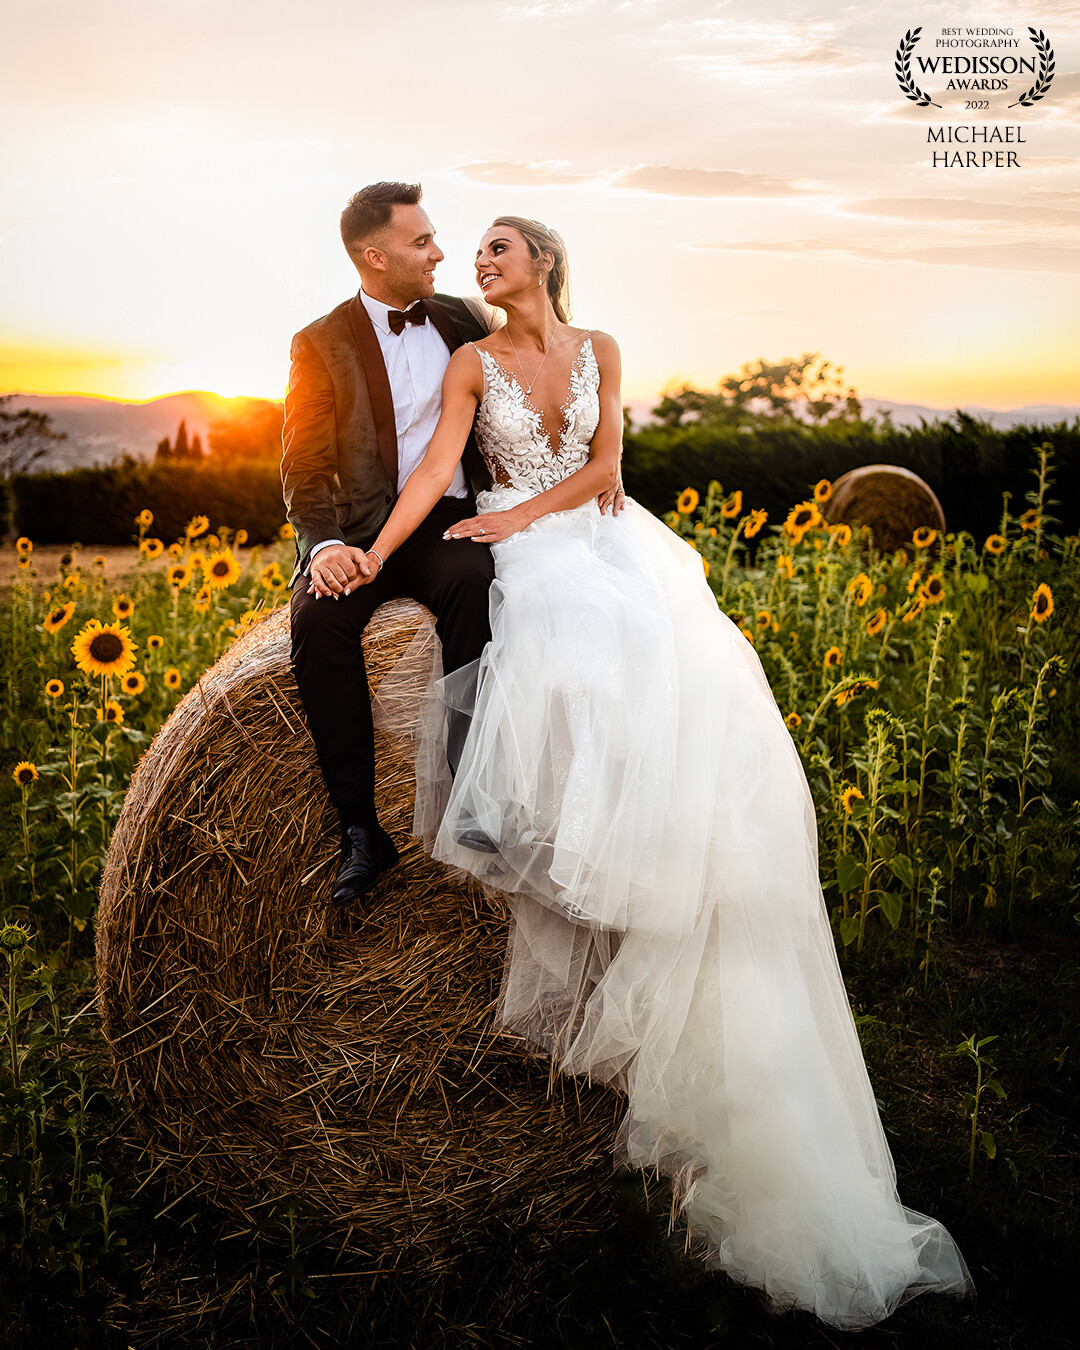 A rare moment when we had access to a hay bale,  a sunflower garden, a sunset and a couple who are up for anything! And this is the result.